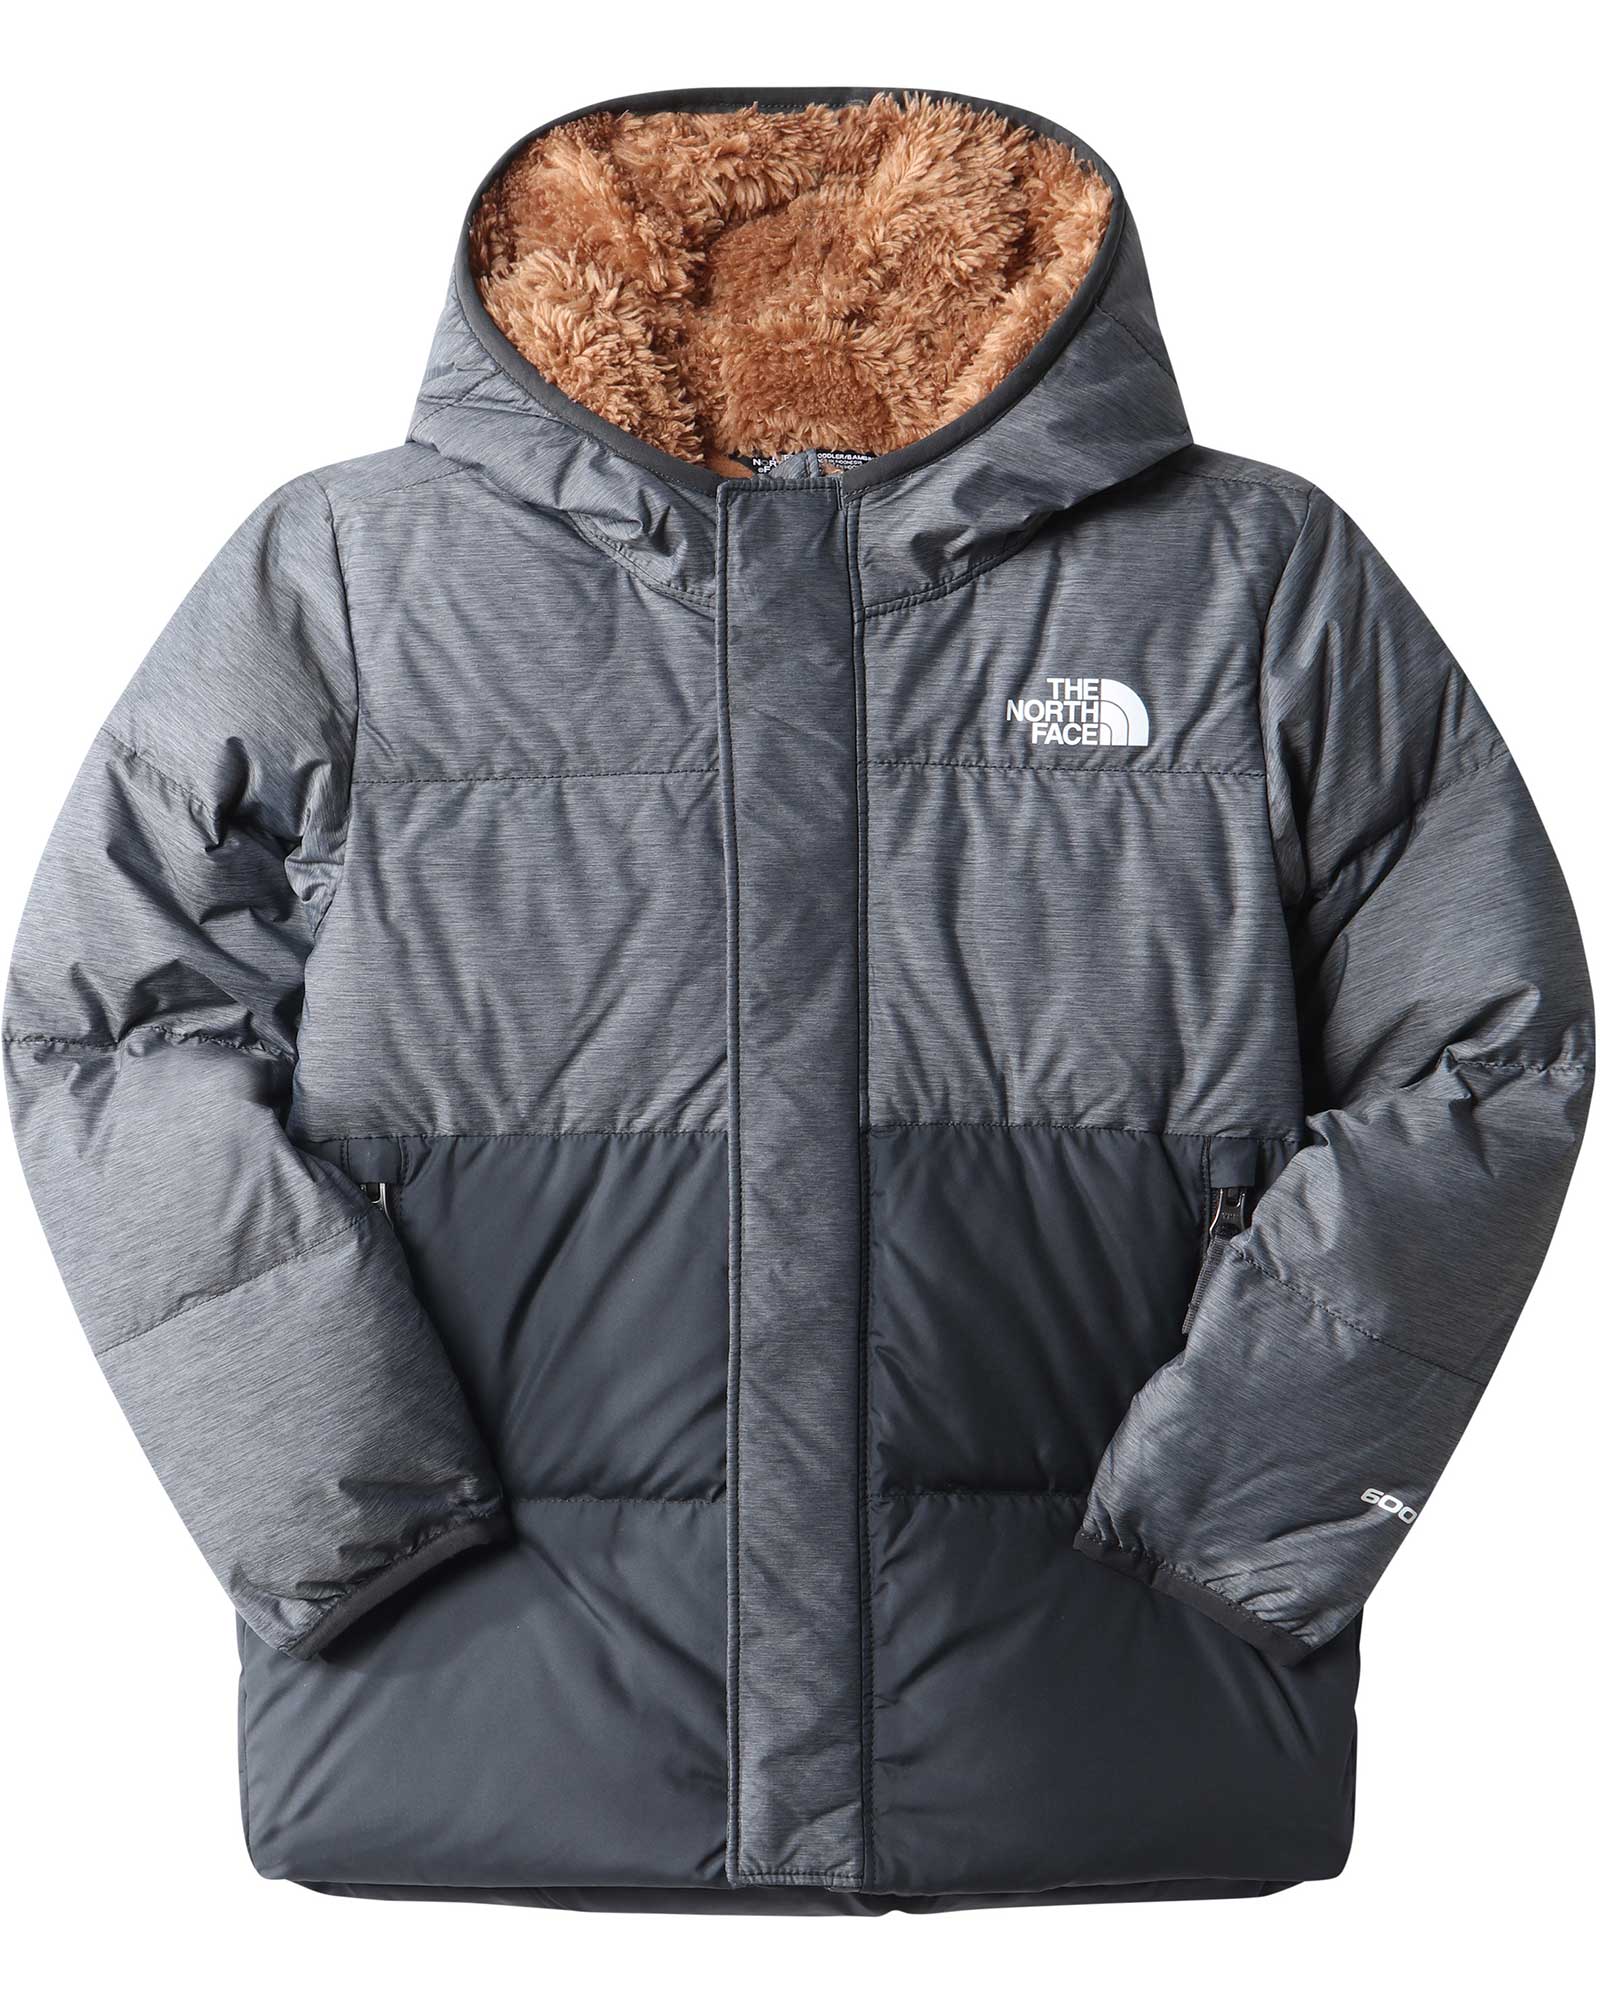 The North Face North Kids Down Hooded Jacket